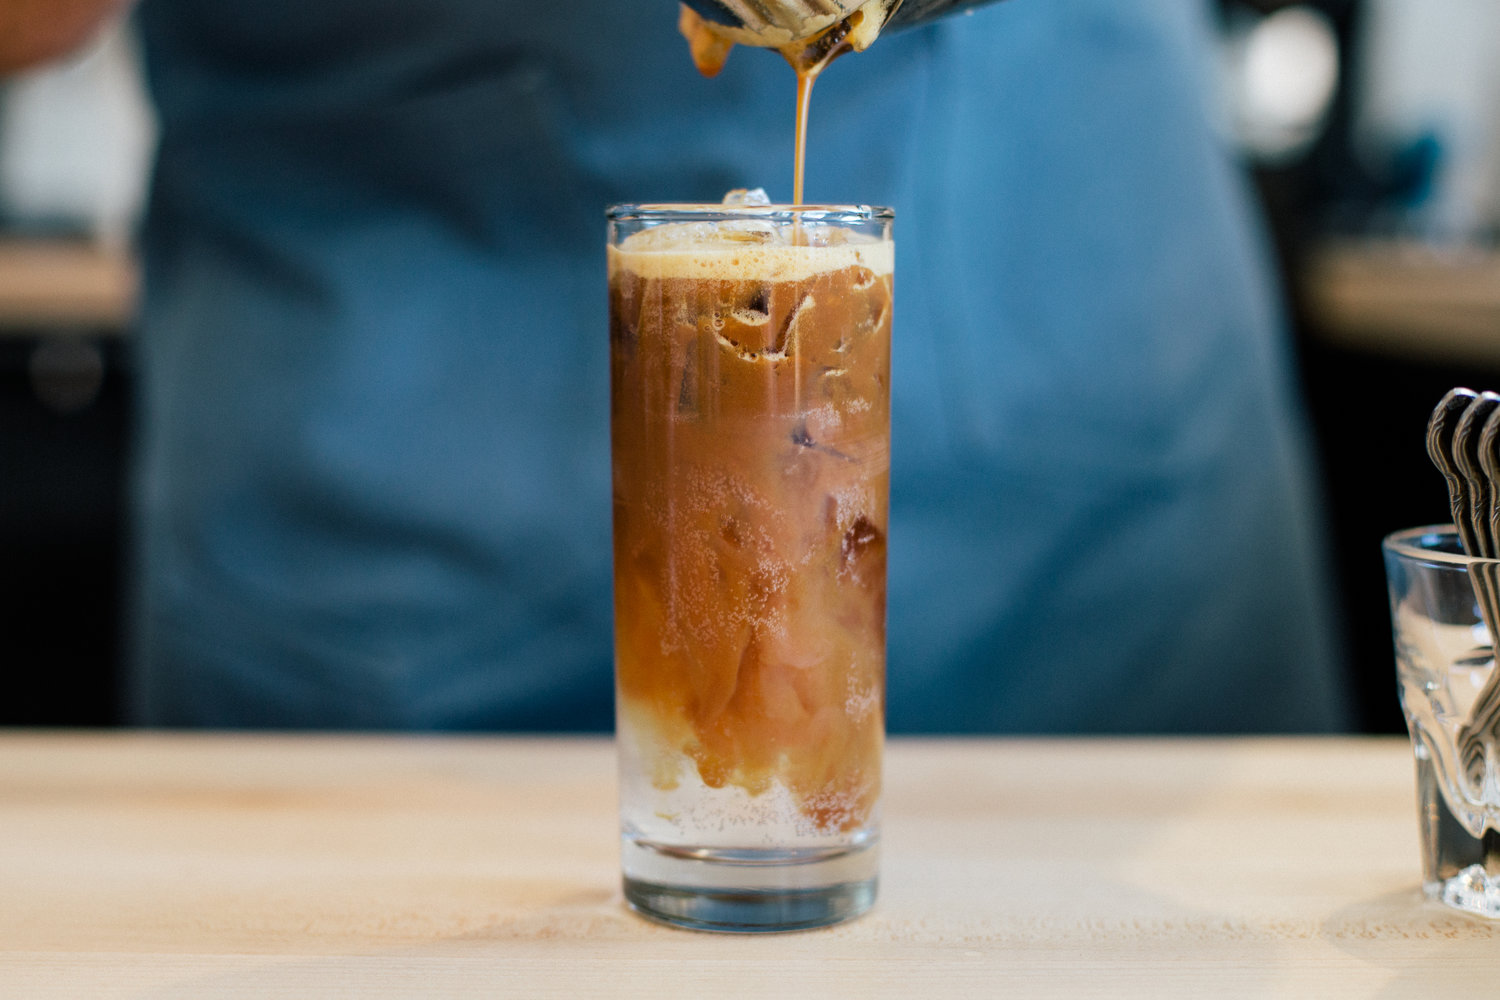 An iced coffee drink in a tall clear glass.